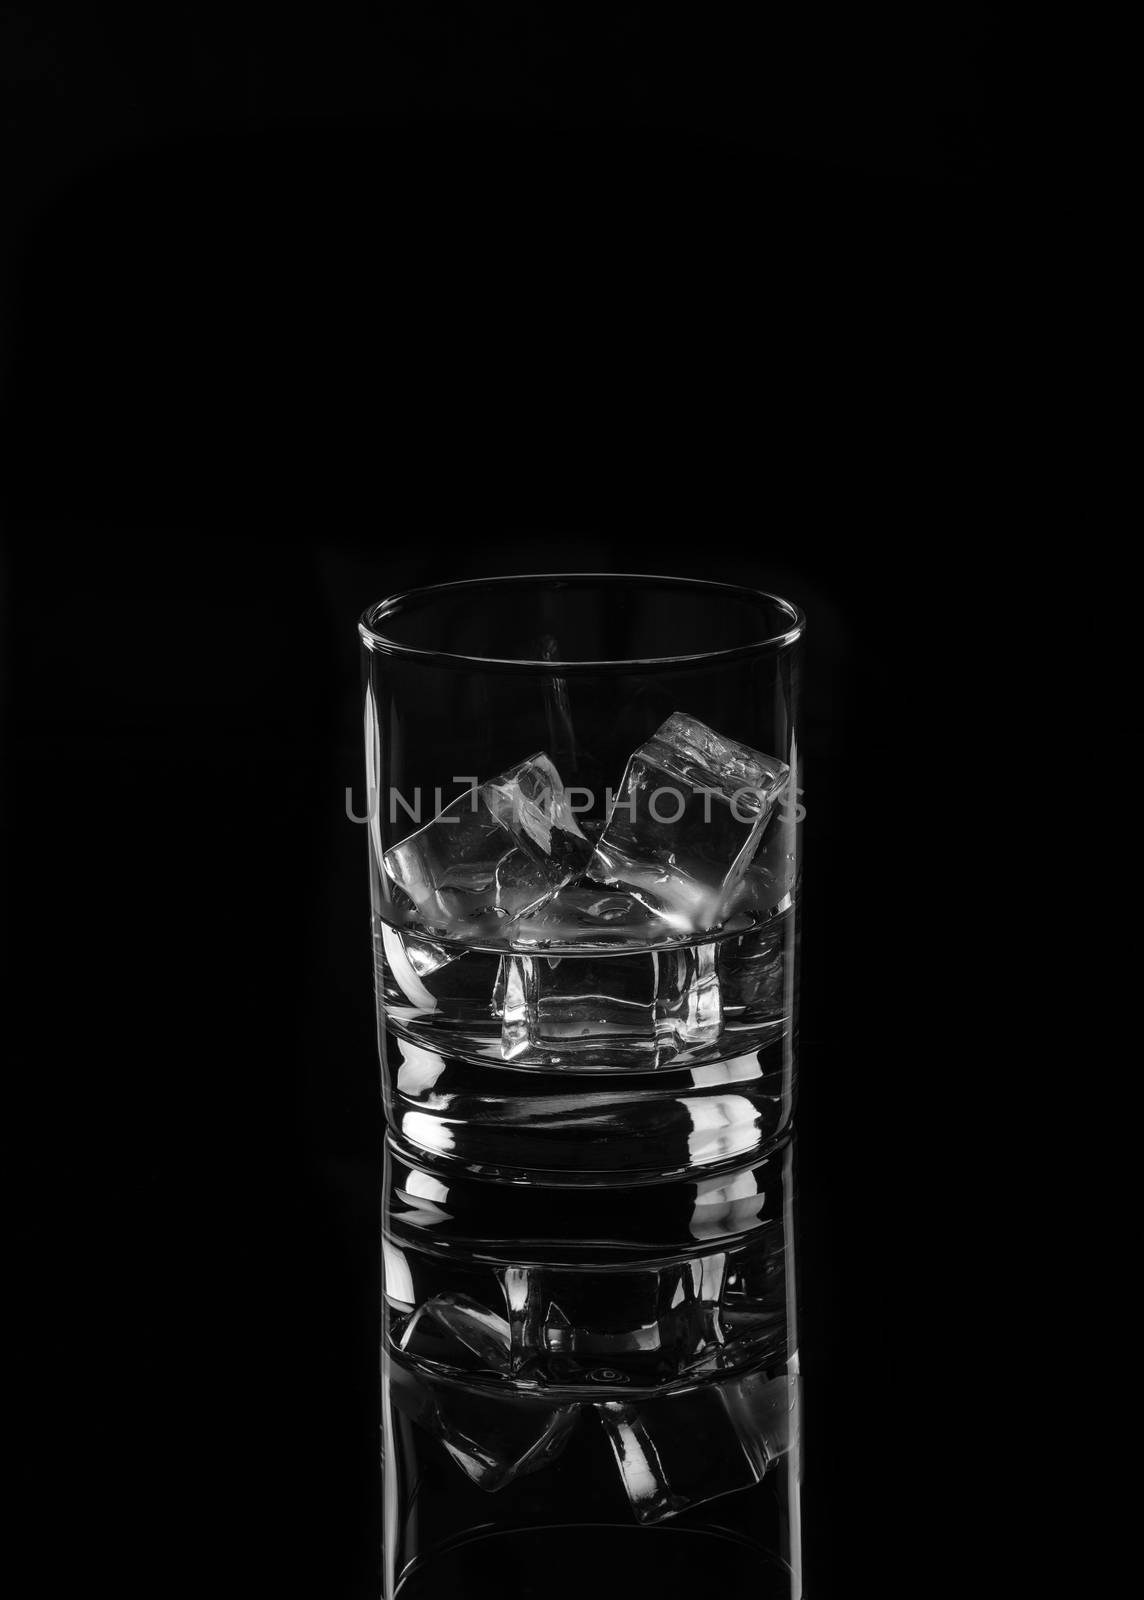 Vodka or gin tonic with ice in rocks glass on black background including clipping path